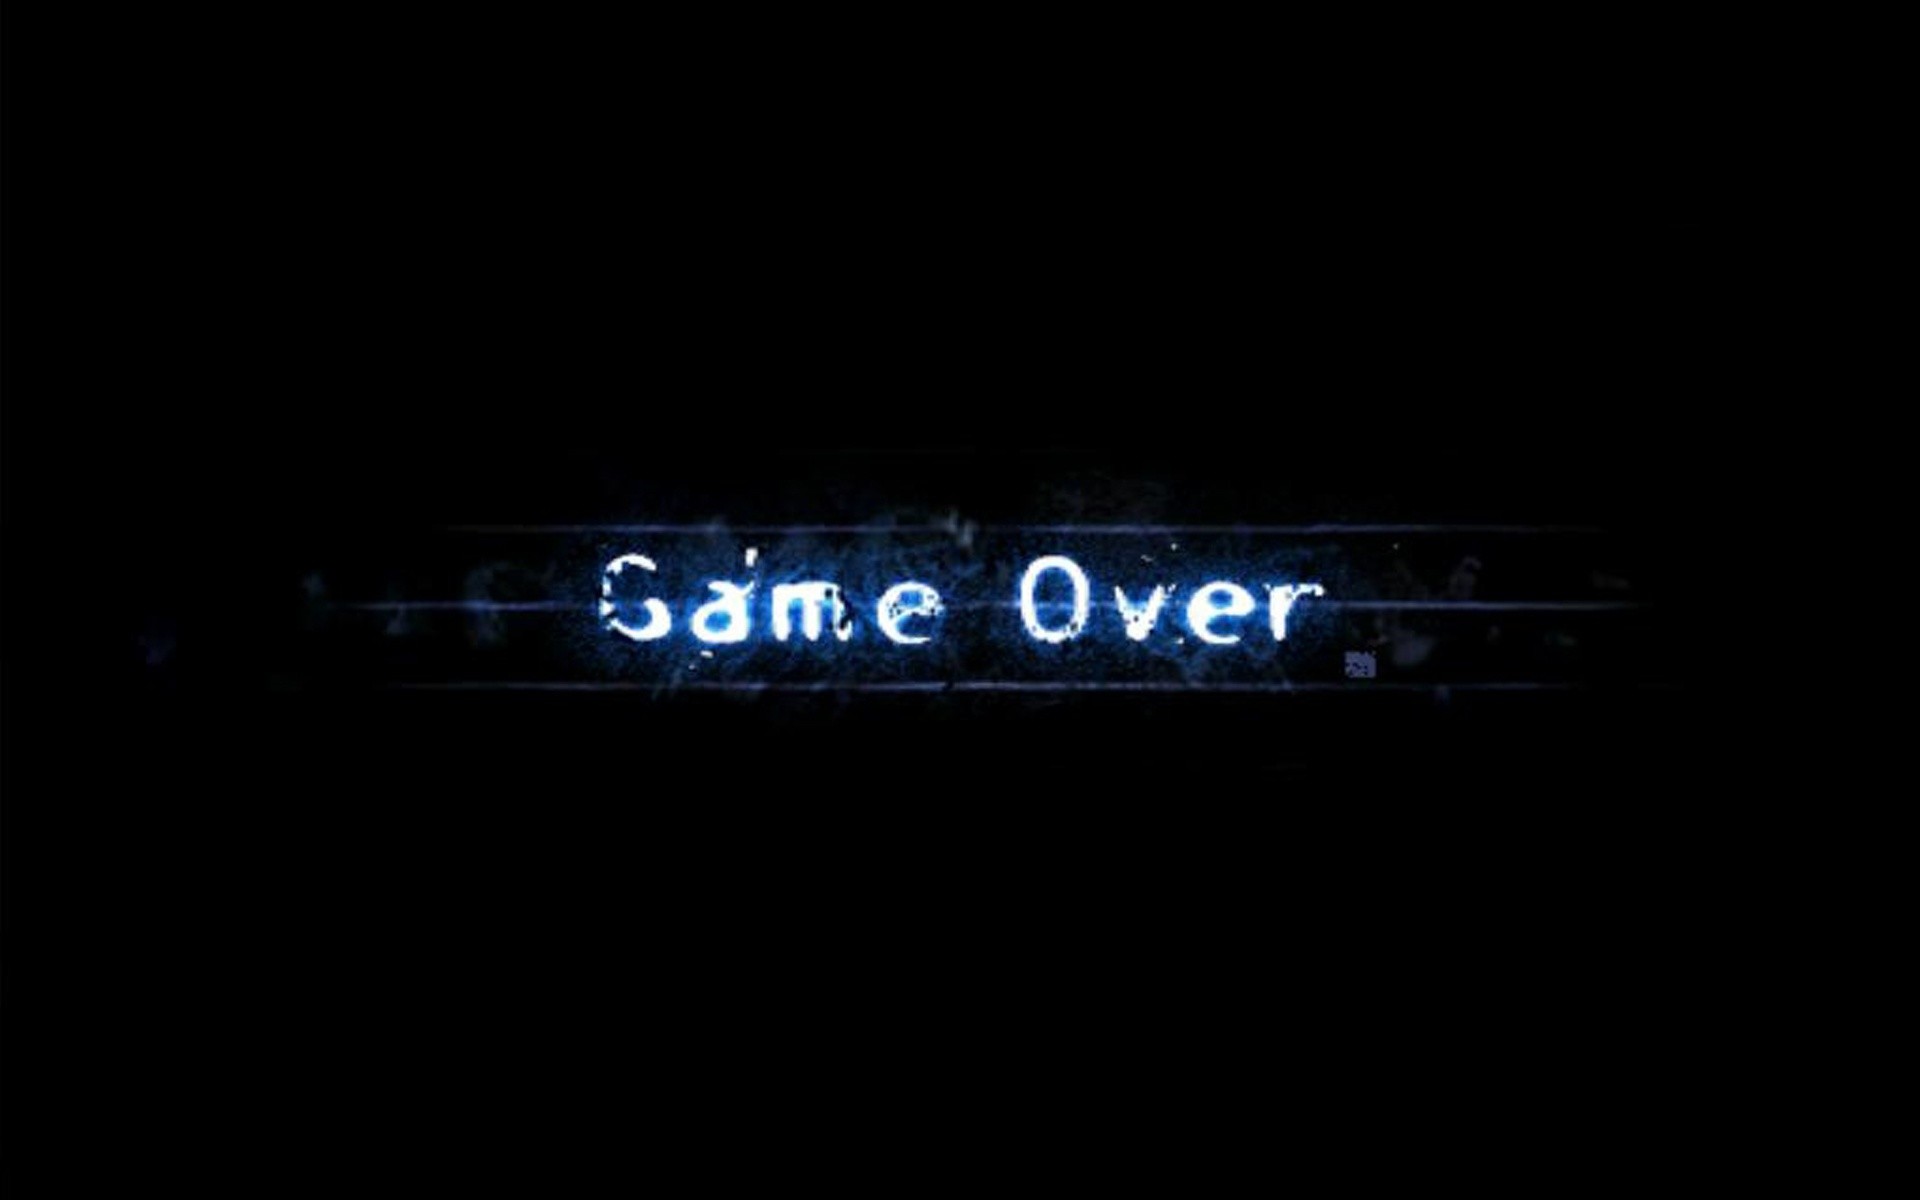 1920x1200 Game over desktop wallpapers 800x600, Game over backgrounds 800x600 .